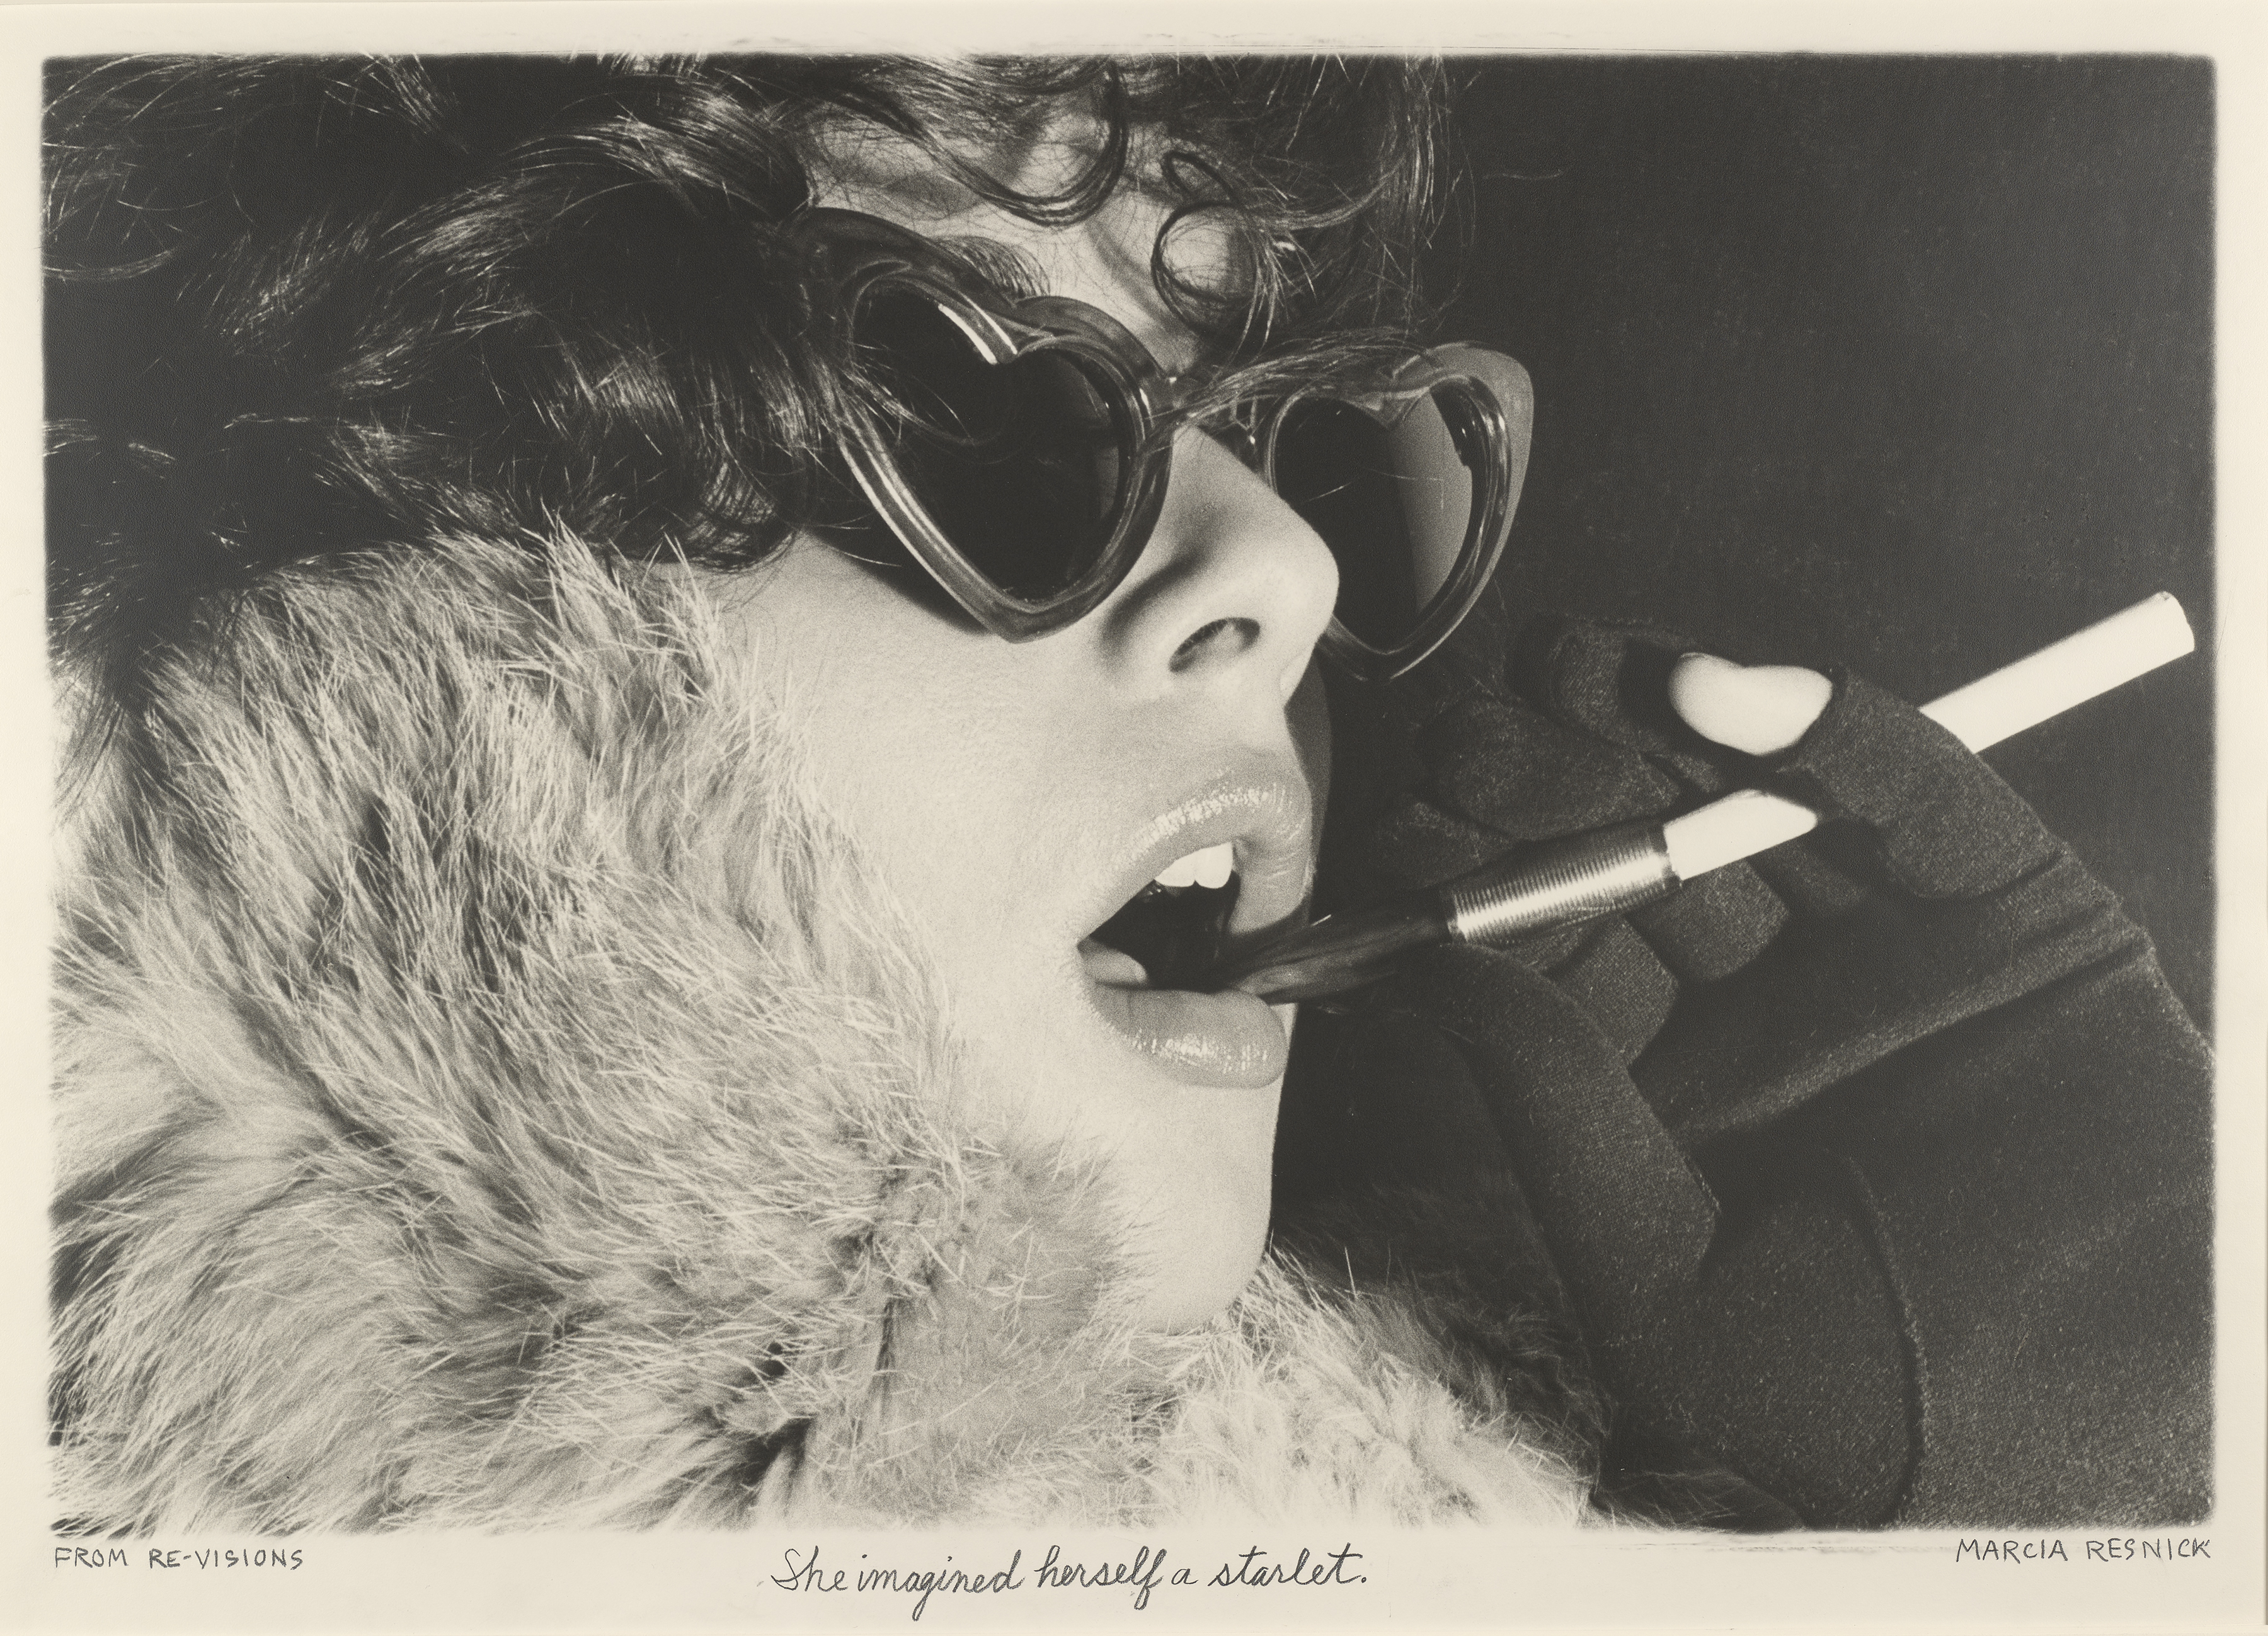 Photograph of a model wearing heart sunglasses and holding a cigarette photographed by Marcia Resnick